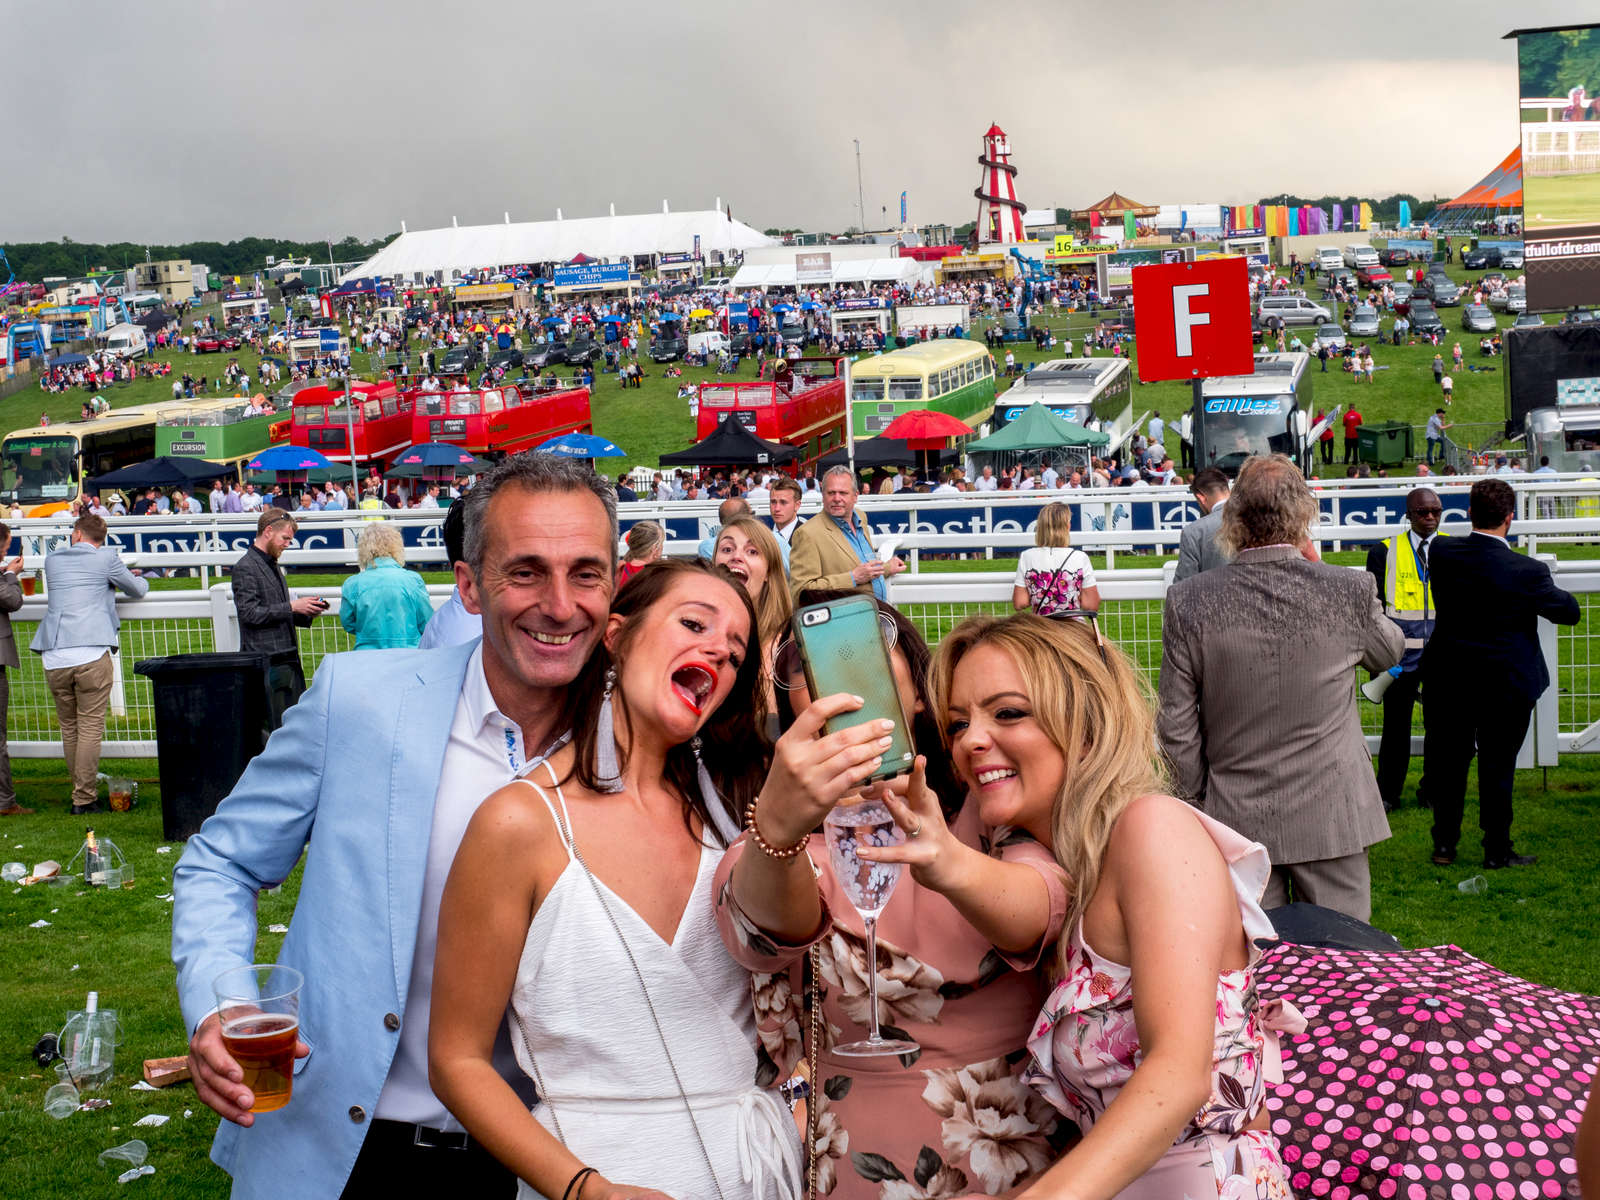 Friends take a selfie on a visit to Epsom.Ladies' Day is traditionally held on the first Friday of June, a multitude of ladies and gents head to Epsom Downs Racecourse to experience a day full of high octane racing, music, glamour and fashion.